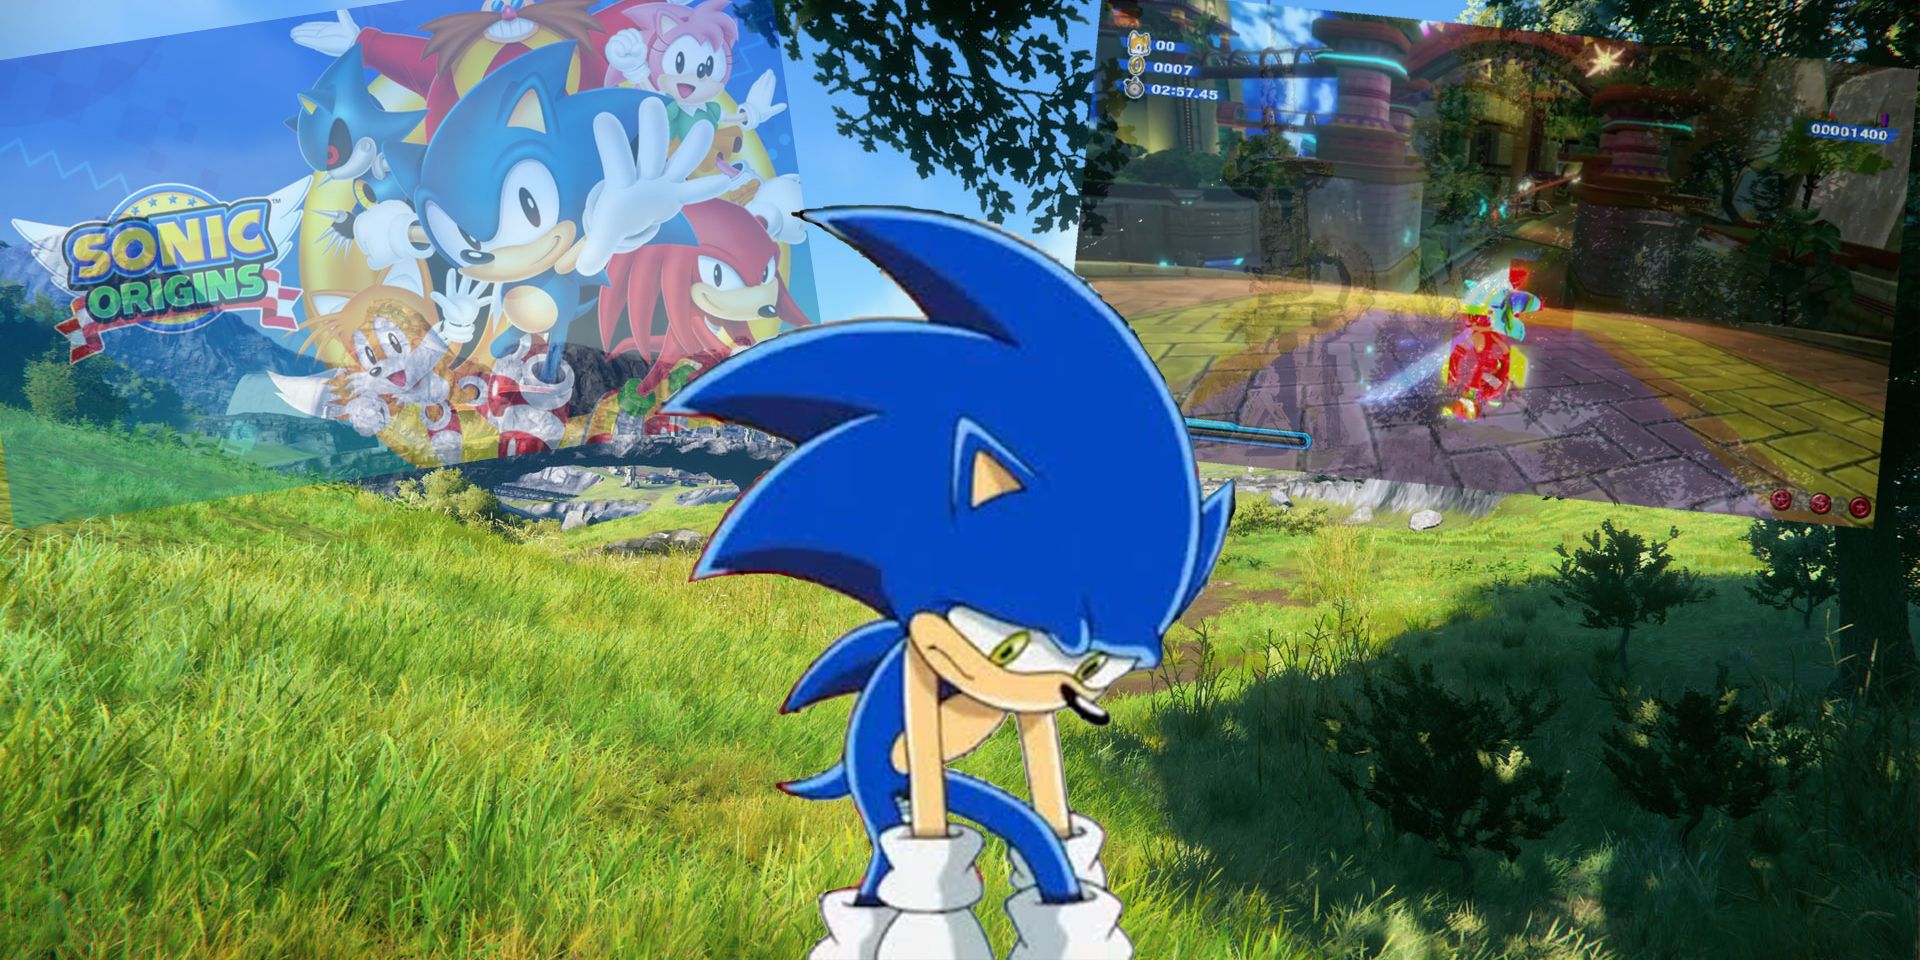 An image collage of Sonic hunched over and tired, with snapshots from Sonic games in the background